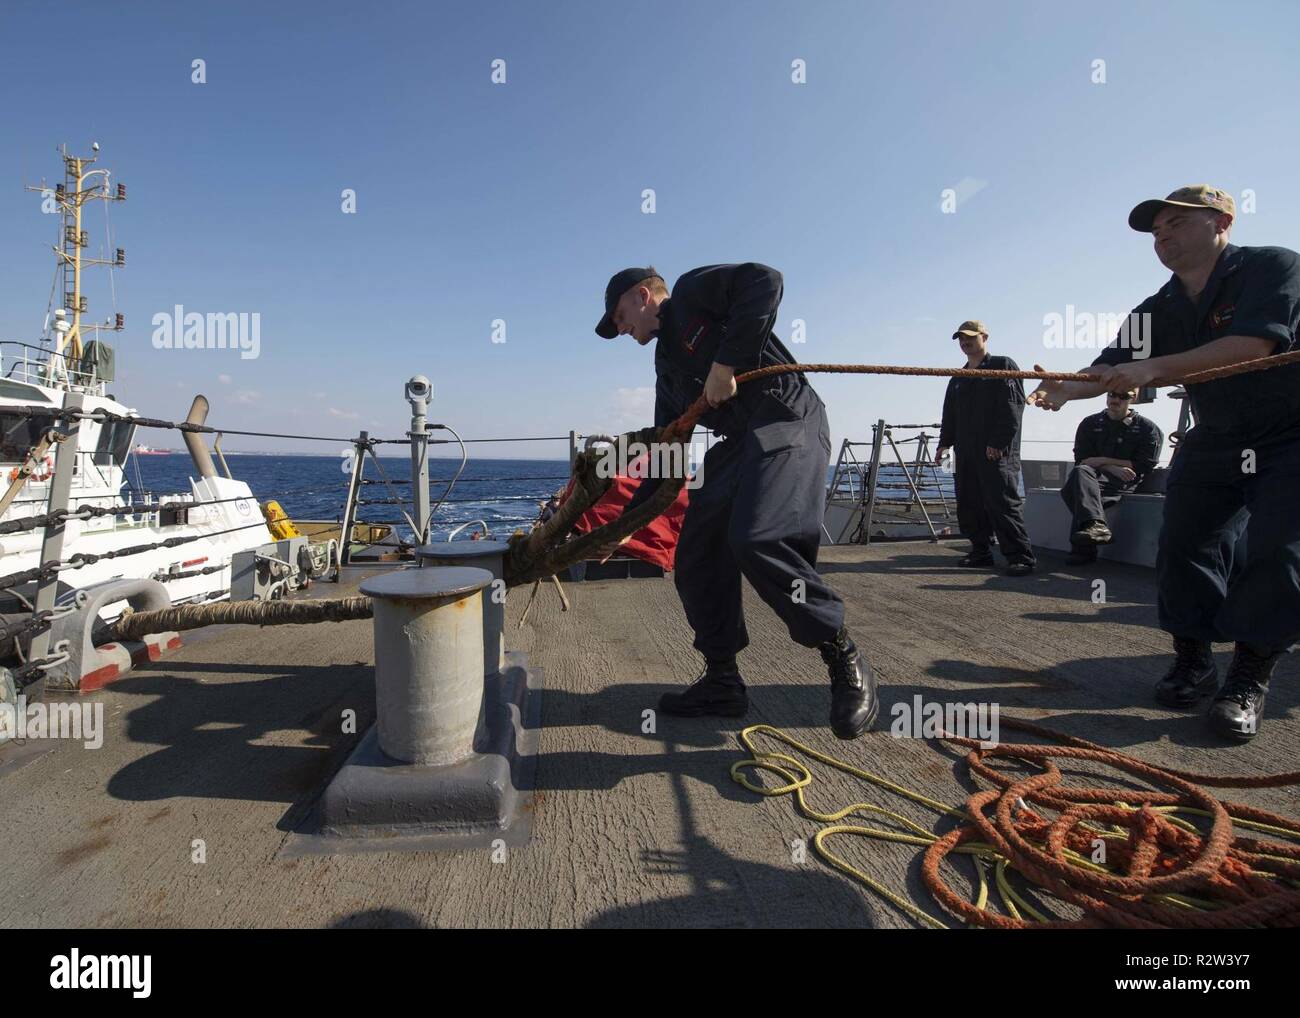 LARNACA, Cyprus (Nov. 9, 2018) Sailors heave a mooring line connected to a tugboat aboard the Arleigh Burke-class guided-missile destroyer USS Arleigh Burke (DDG 51) as the ship arrives at Larnaca, Cyprus for a scheduled port visit Nov. 9, 2018. Arleigh Burke, homeported at Naval Station Norfolk, is conducting naval operations in the U.S. 6th Fleet area of operations in support of U.S. national security interests in Europe and Africa. Stock Photo